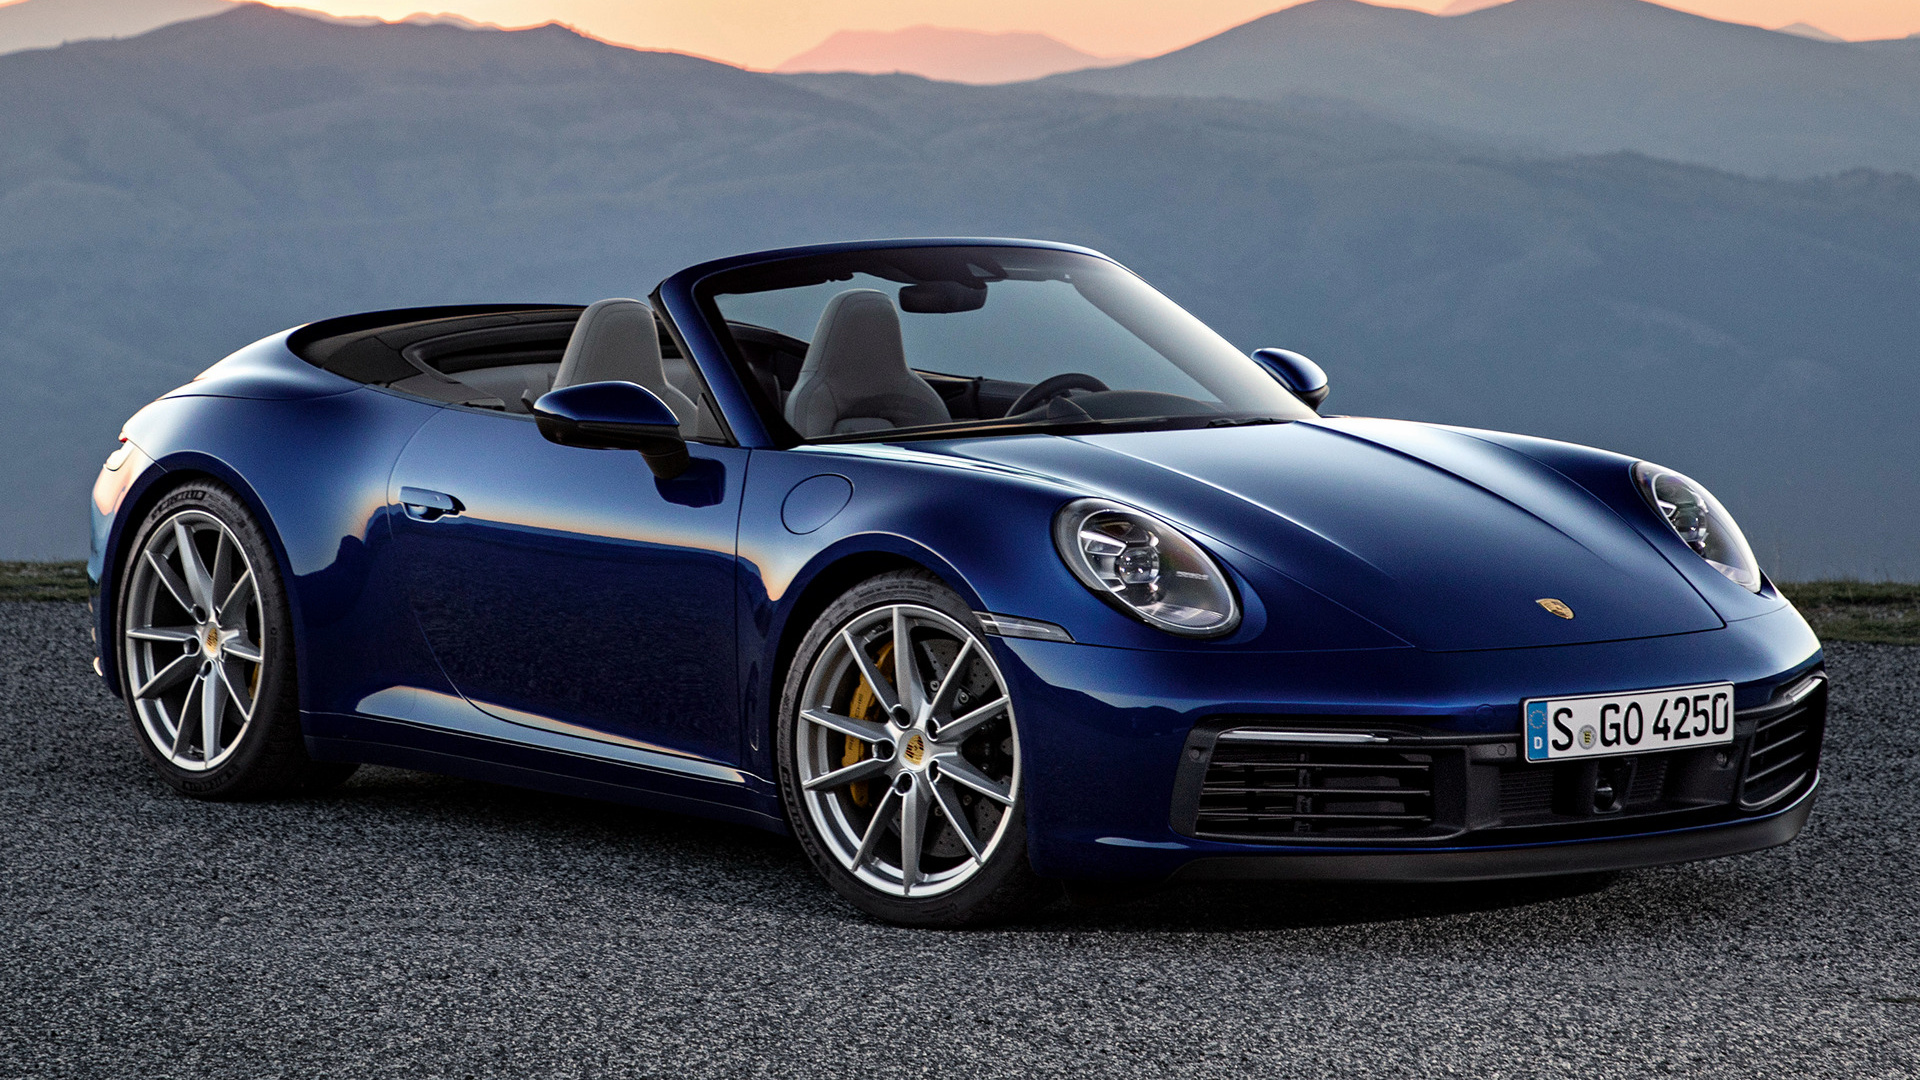 2019 Porsche 911 Carrera S Cabriolet   Wallpapers and HD Images